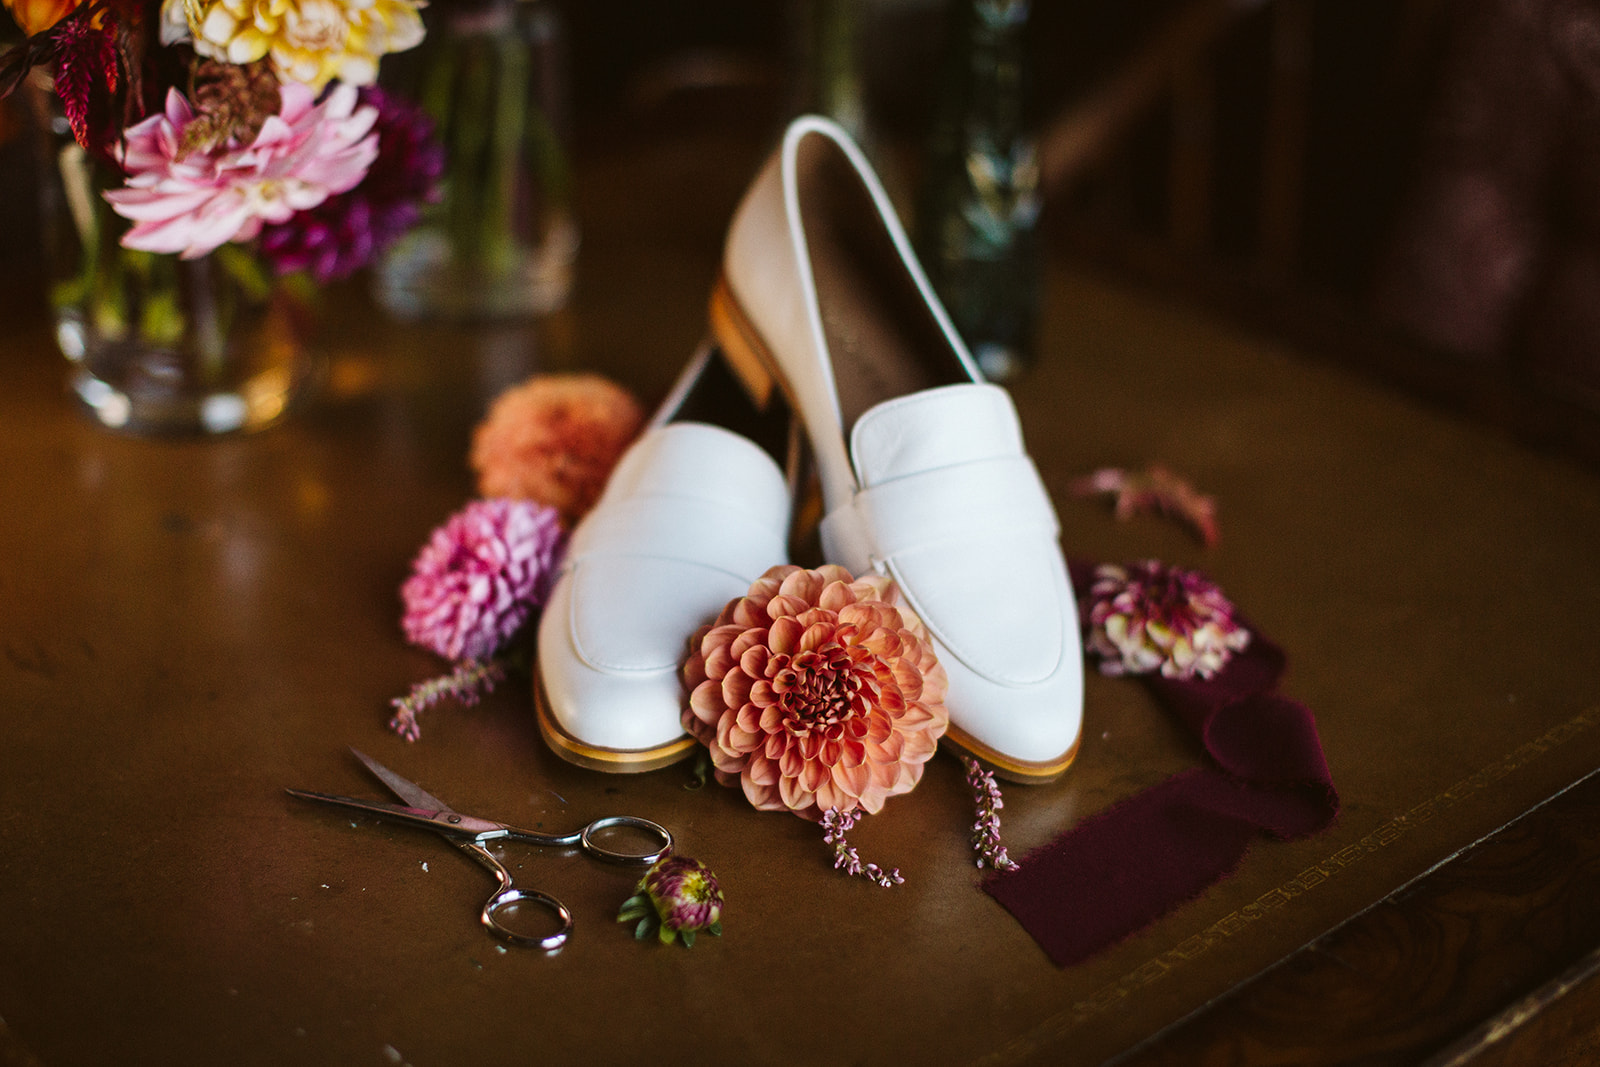 A pair of white women's dress shoes pictured amidst red and pink flowers.